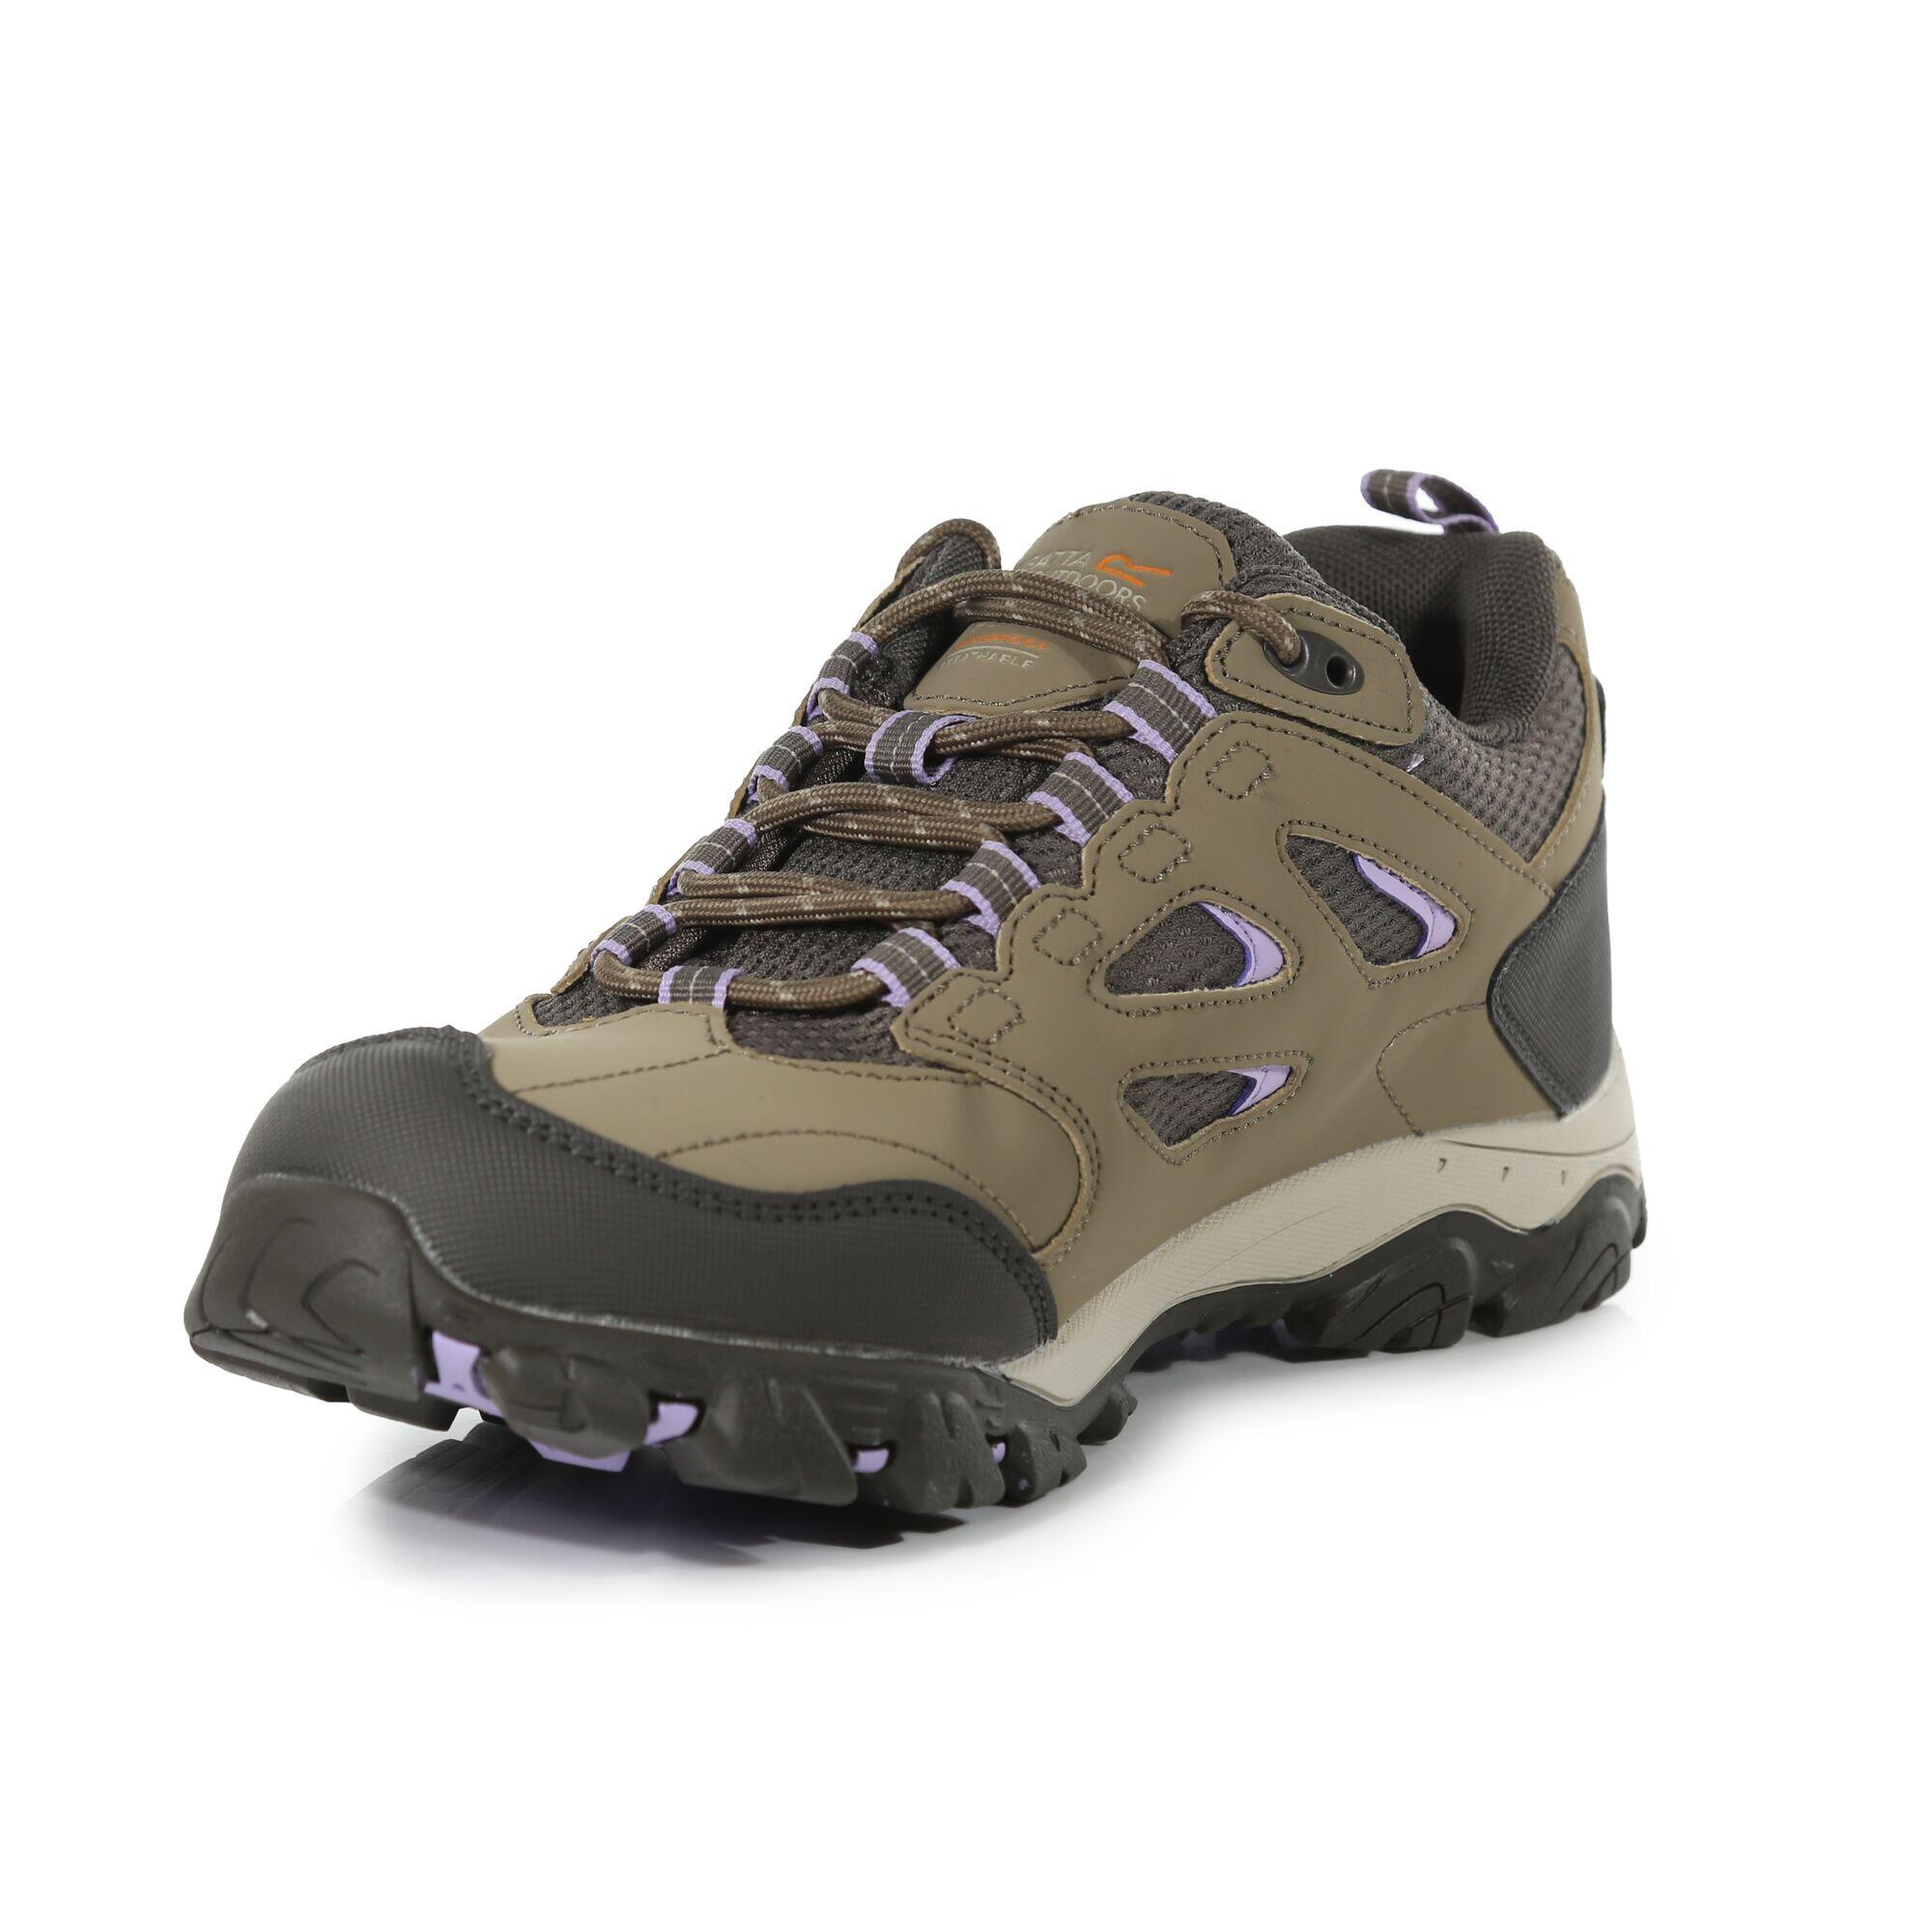 Lady Holcombe IEP Low Women's Hiking Boots - Brown Clay 3/5